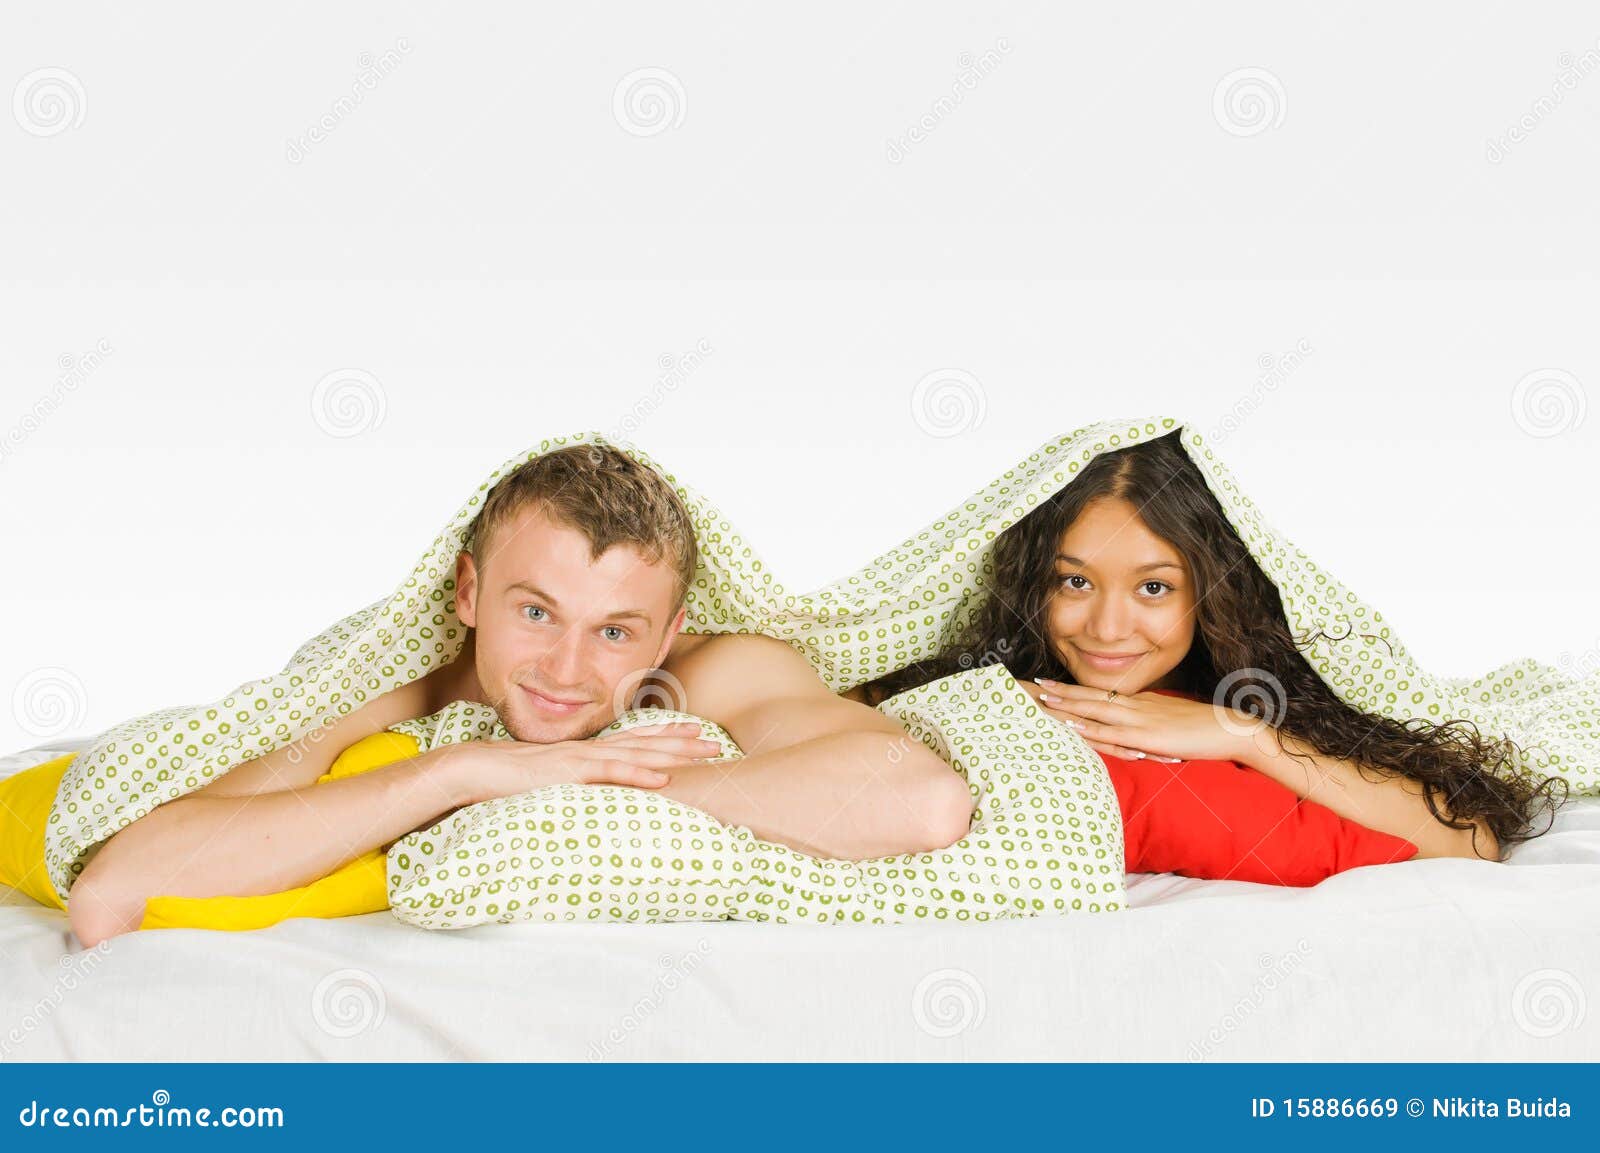 Couple Hiding Under Covers In Bed Royalty Free Stock Images - Image